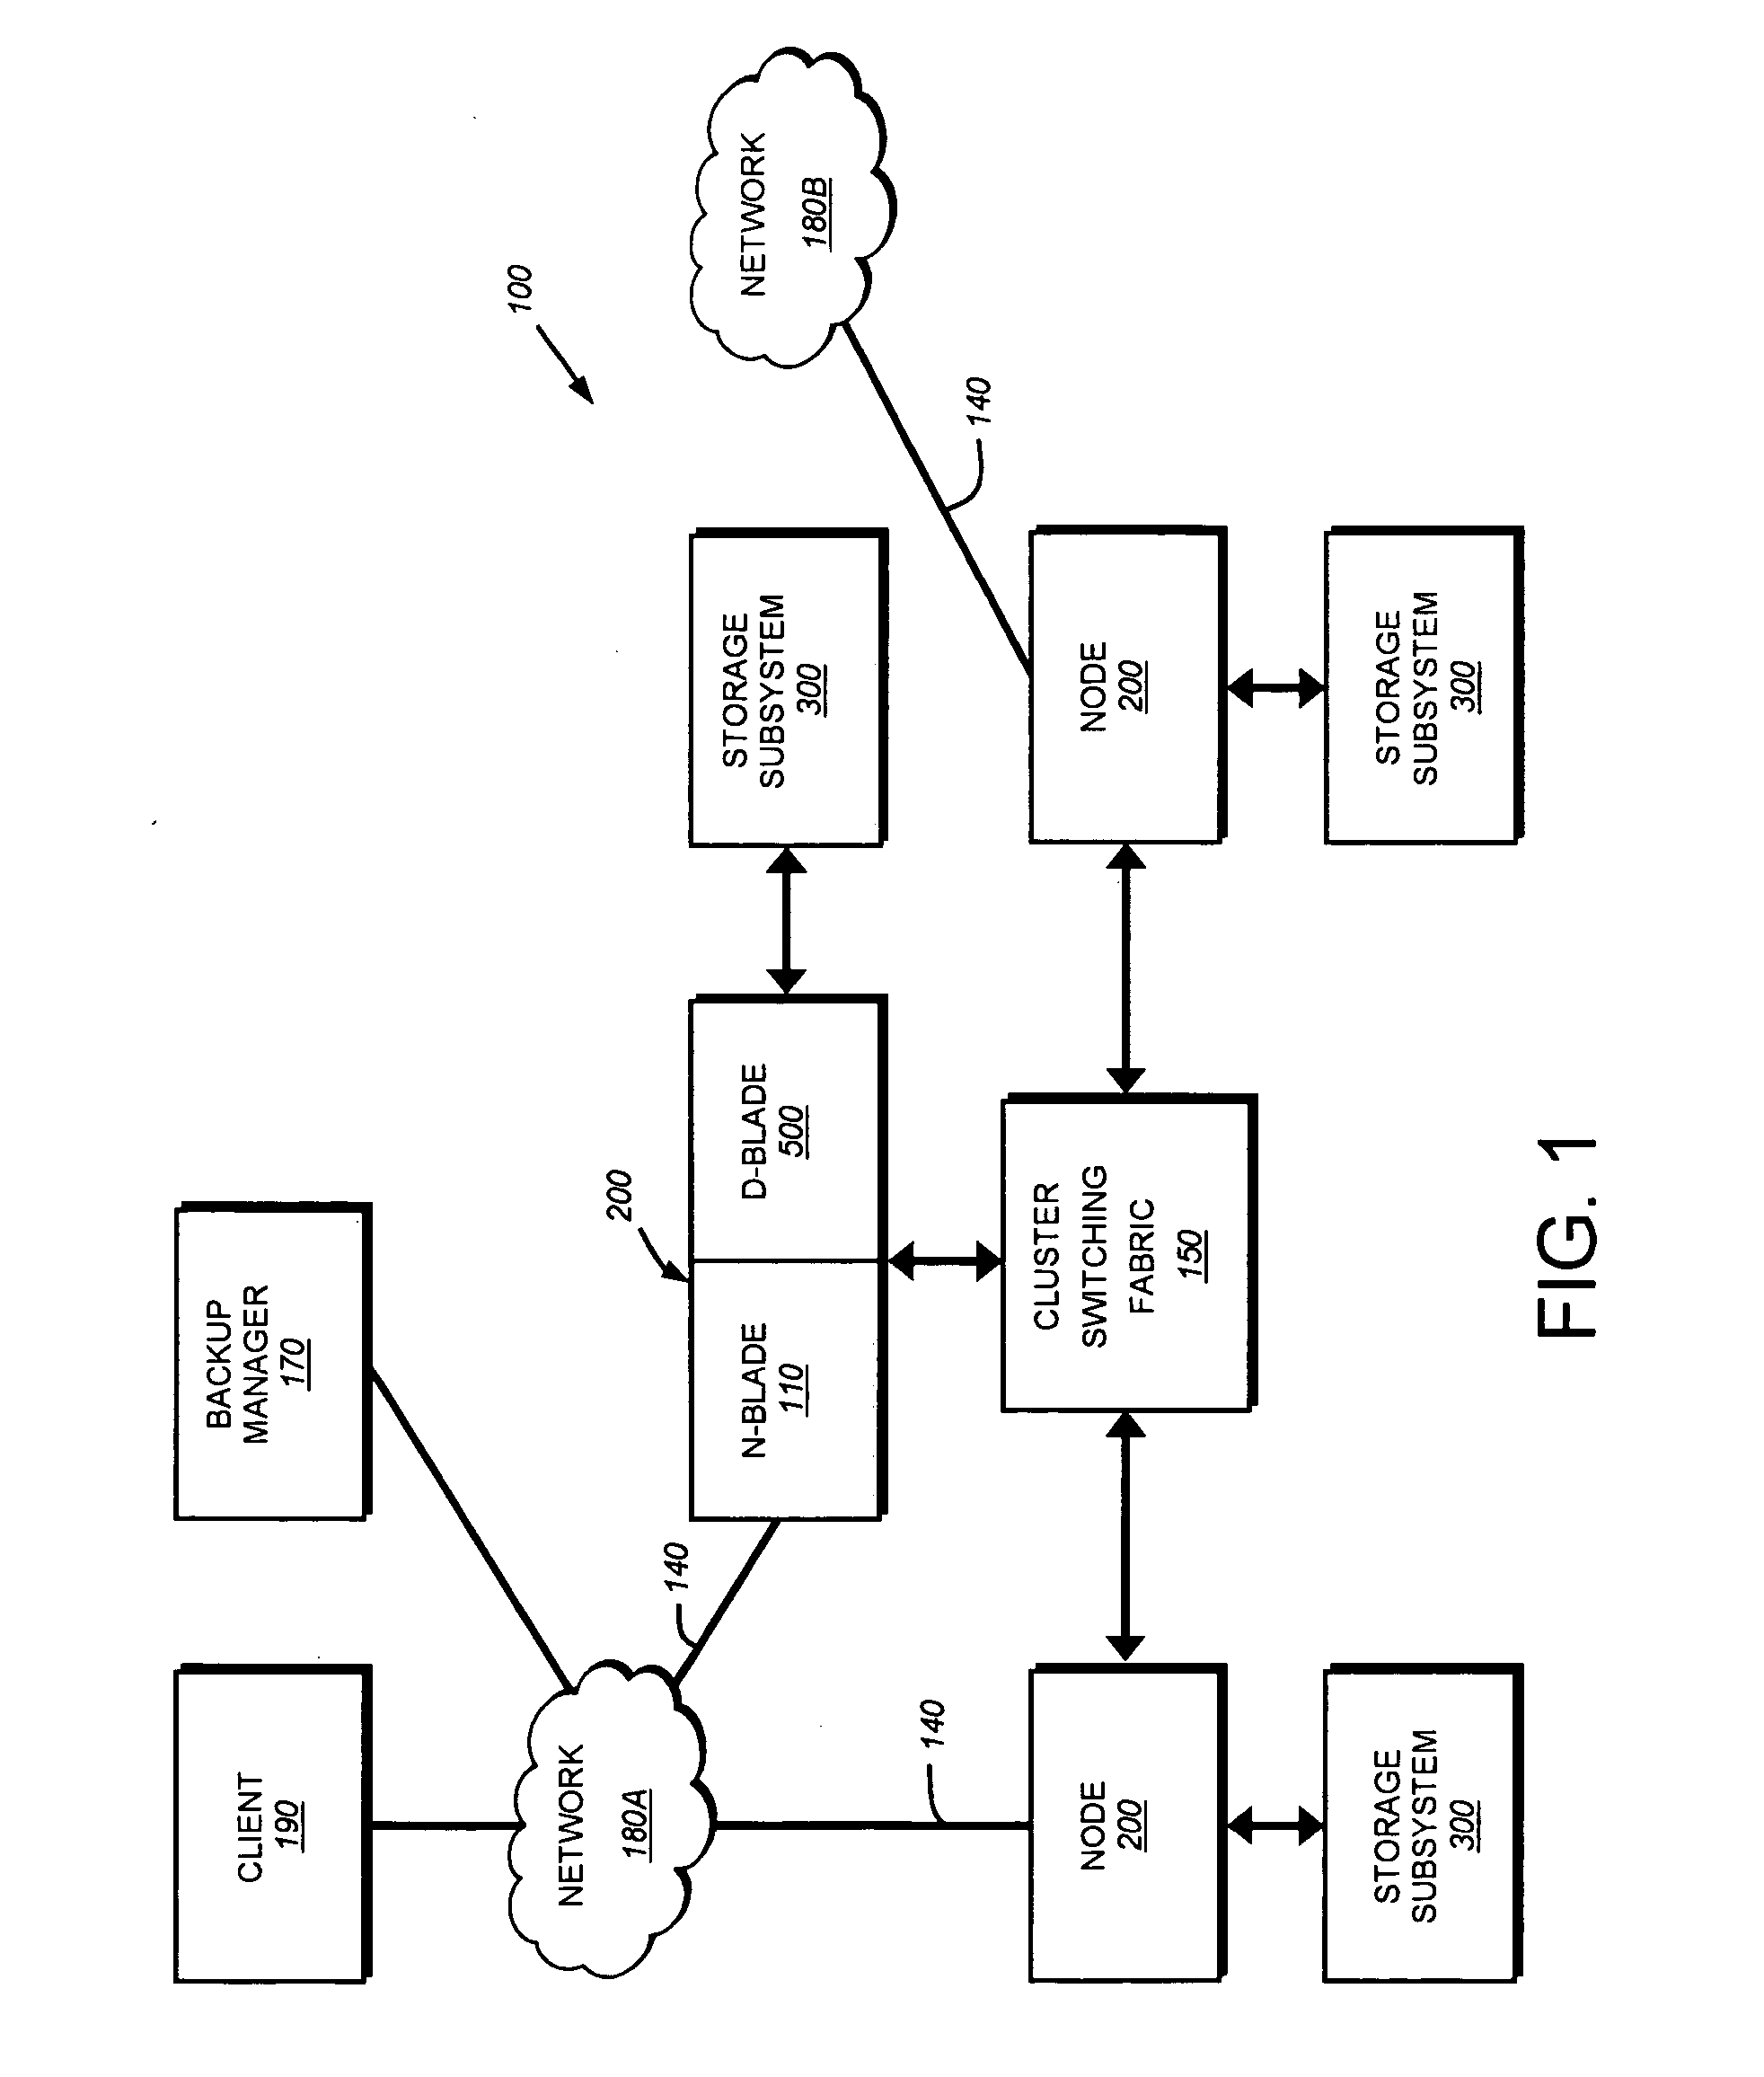 System and method for proxying network management protocol commands to enable cluster wide management of data backups